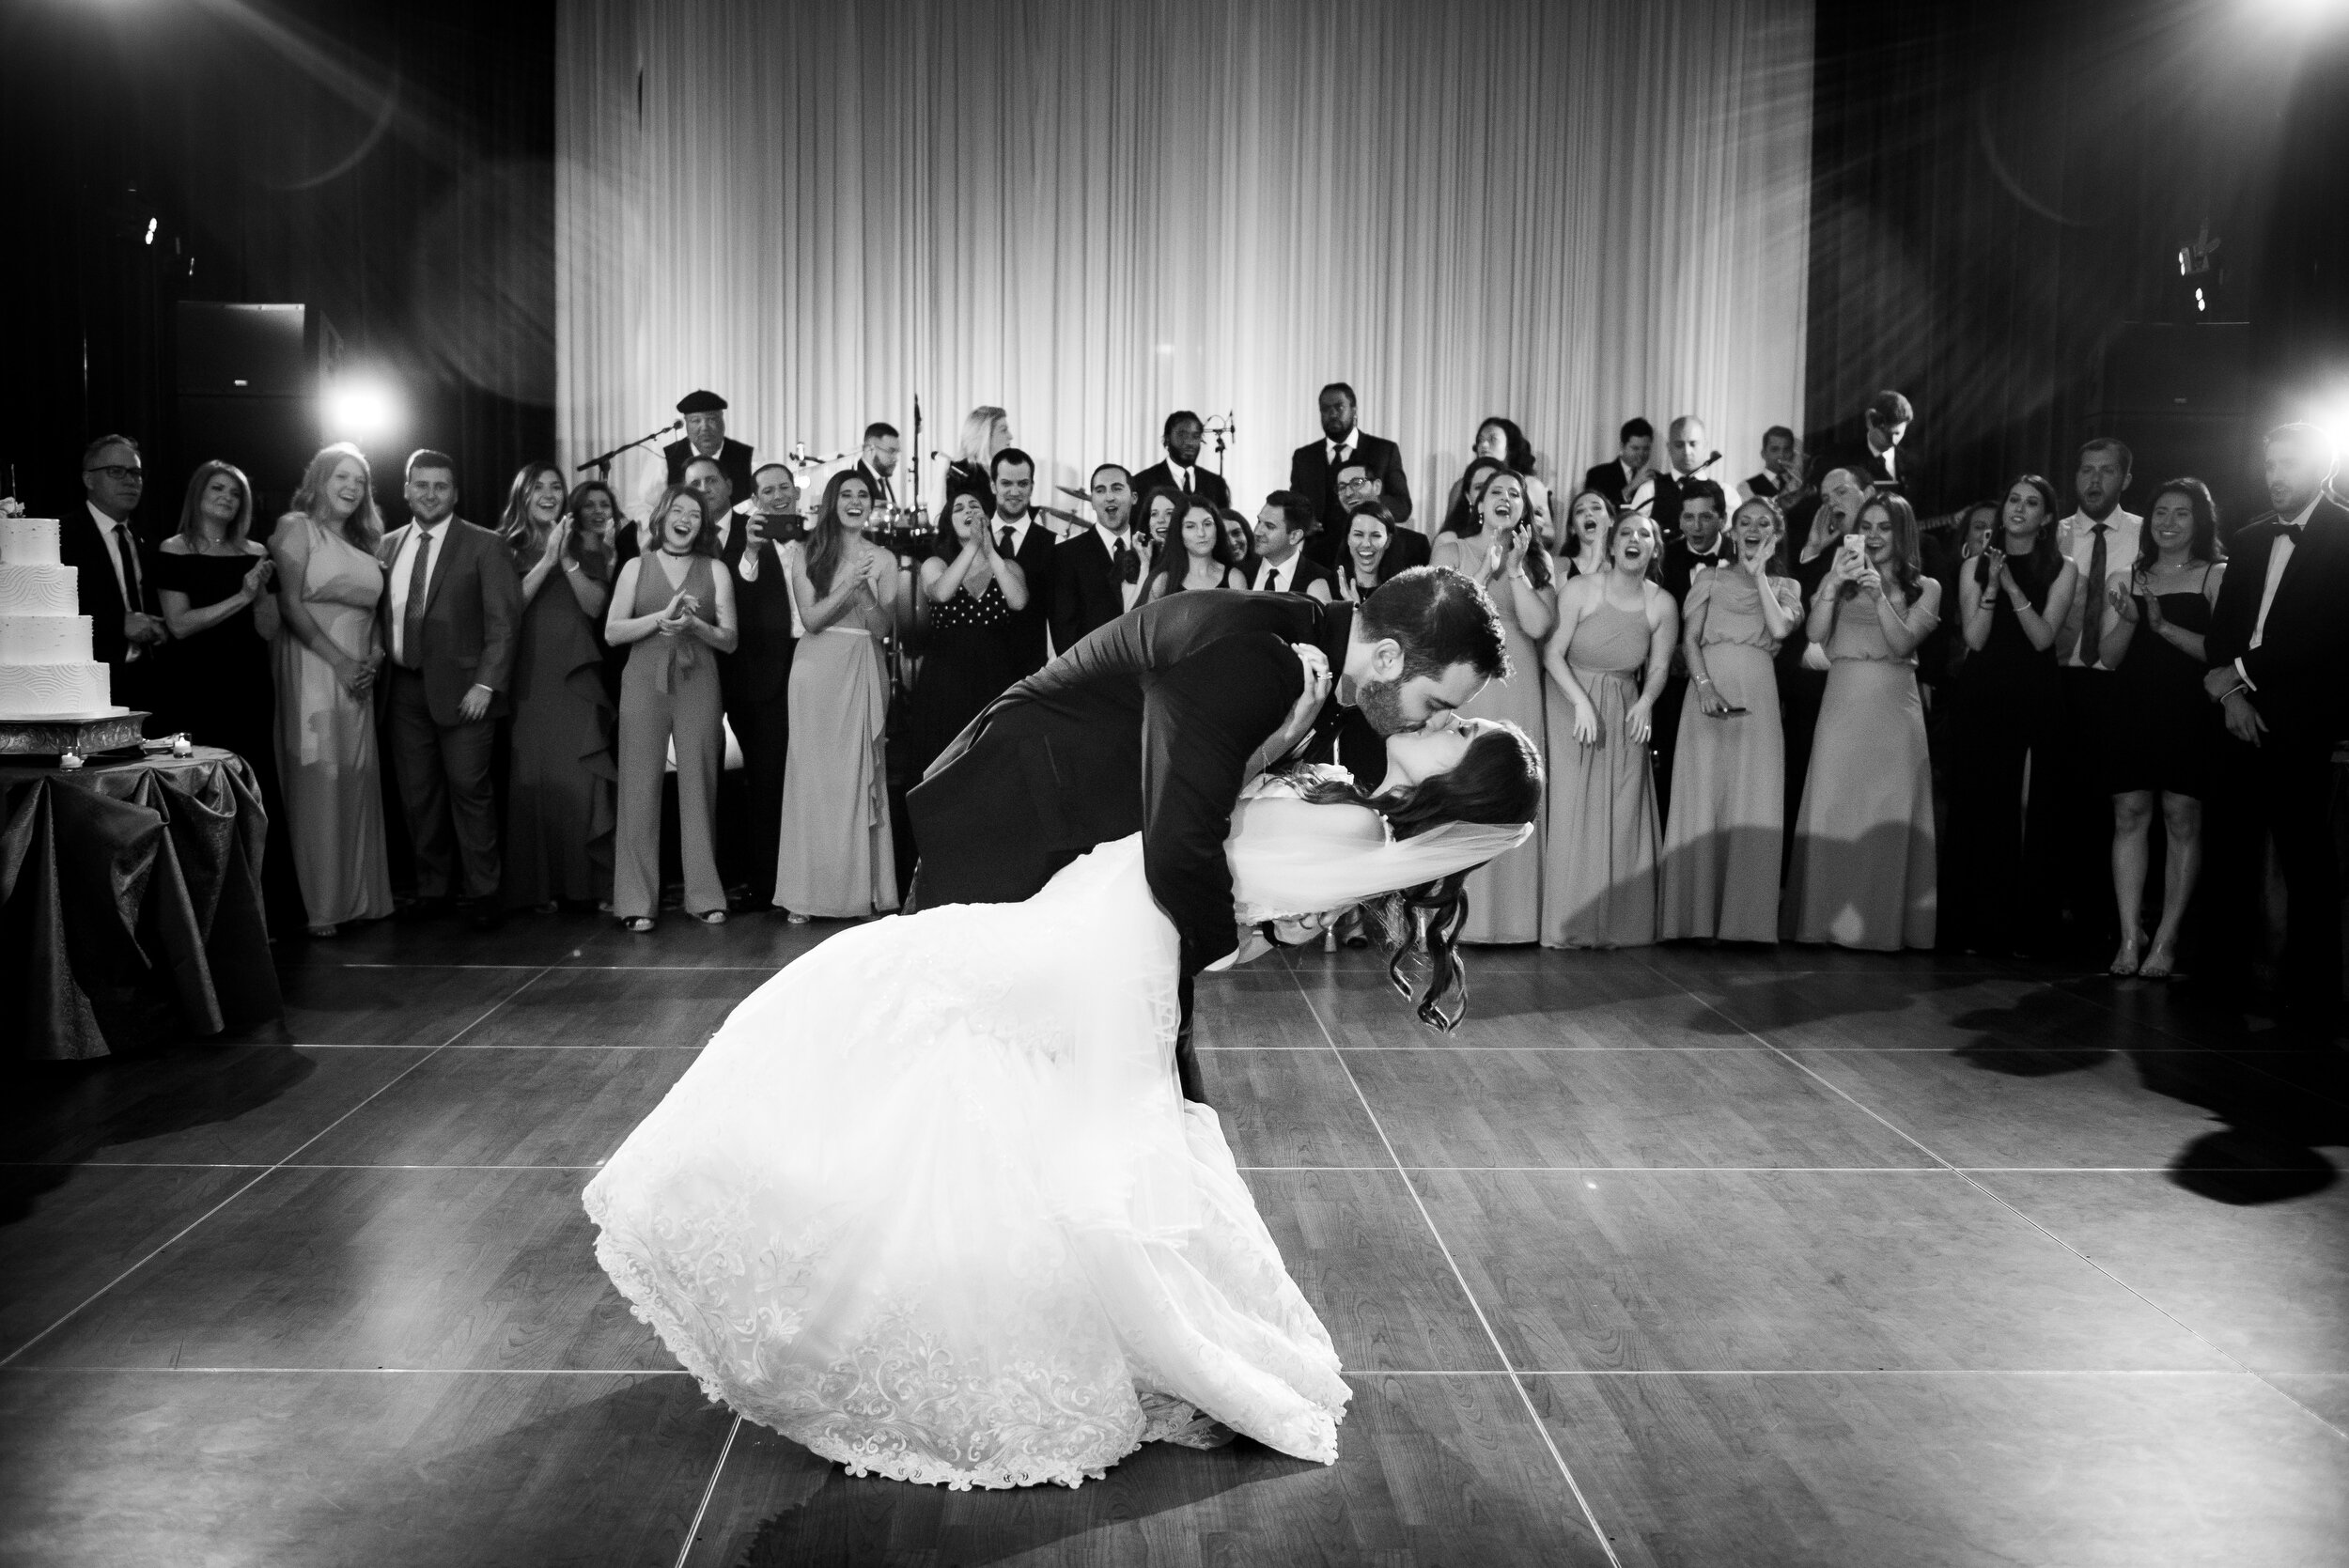 Timeless wedding photography: Loews Chicago Hotel Wedding captured by J. Brown Photography